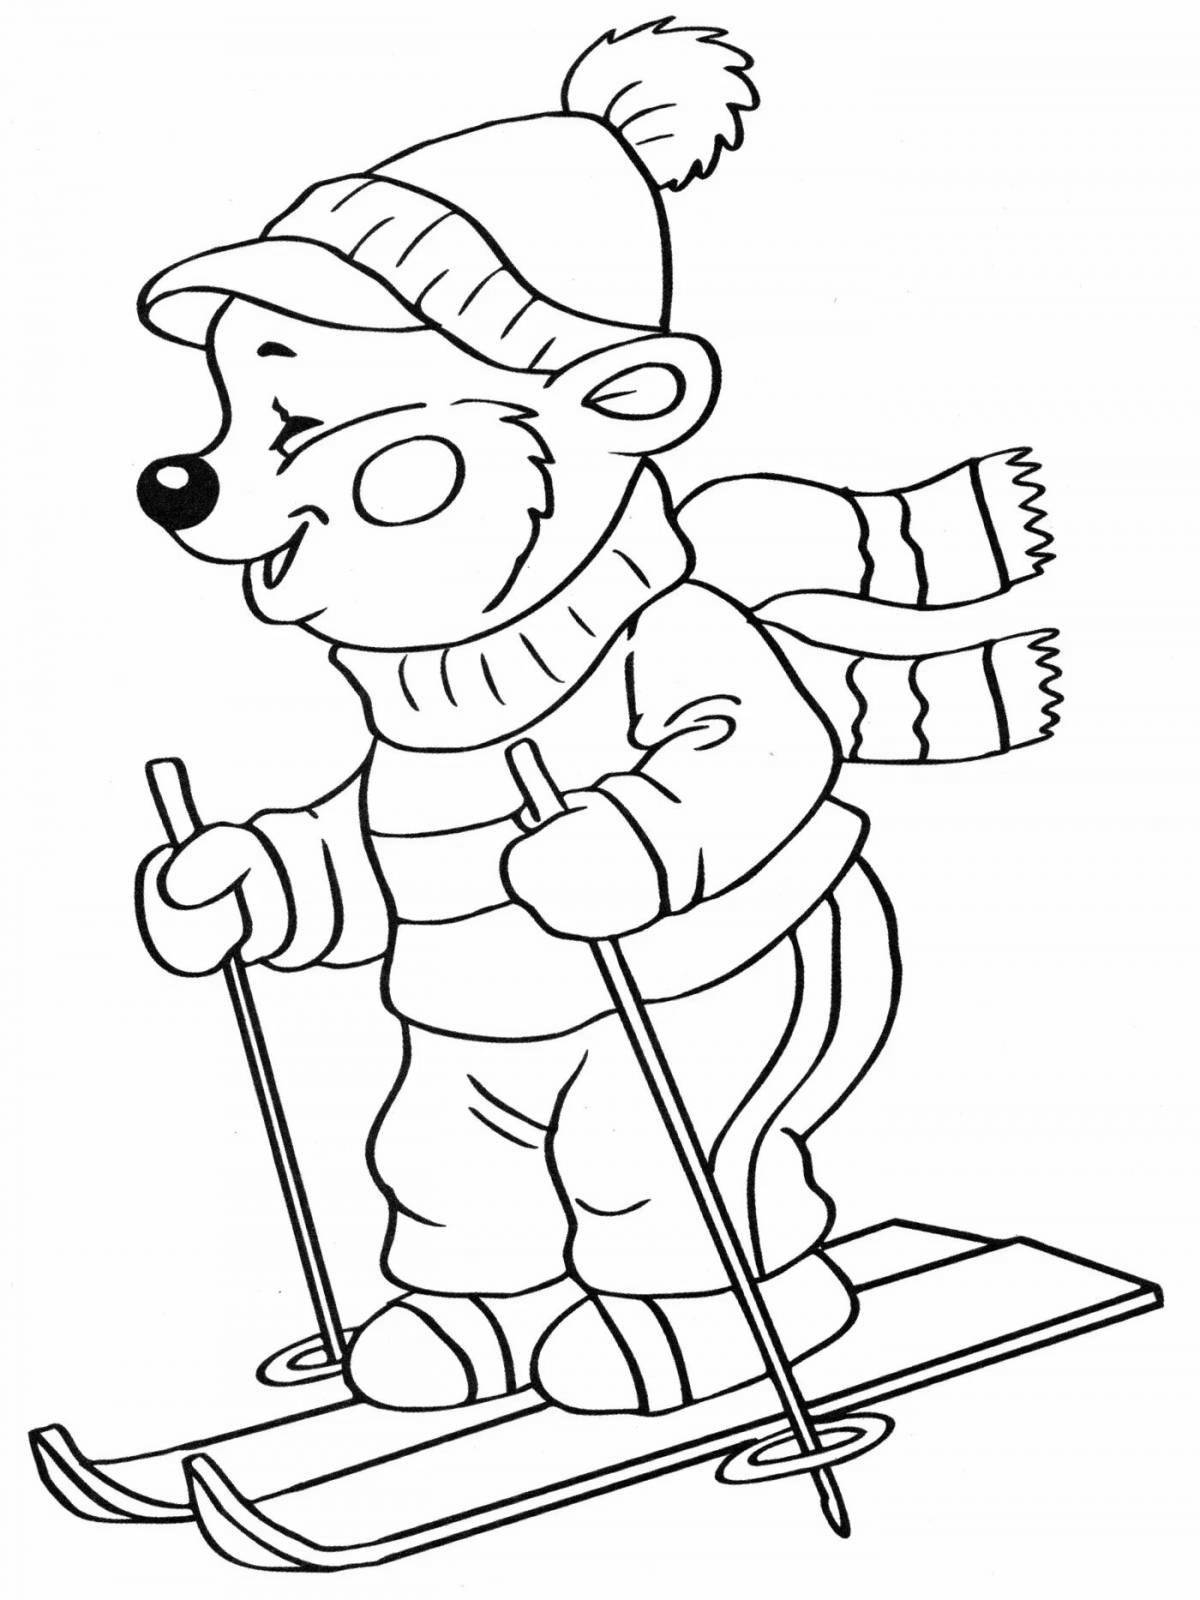 Luminous coloring book for kids winter sports